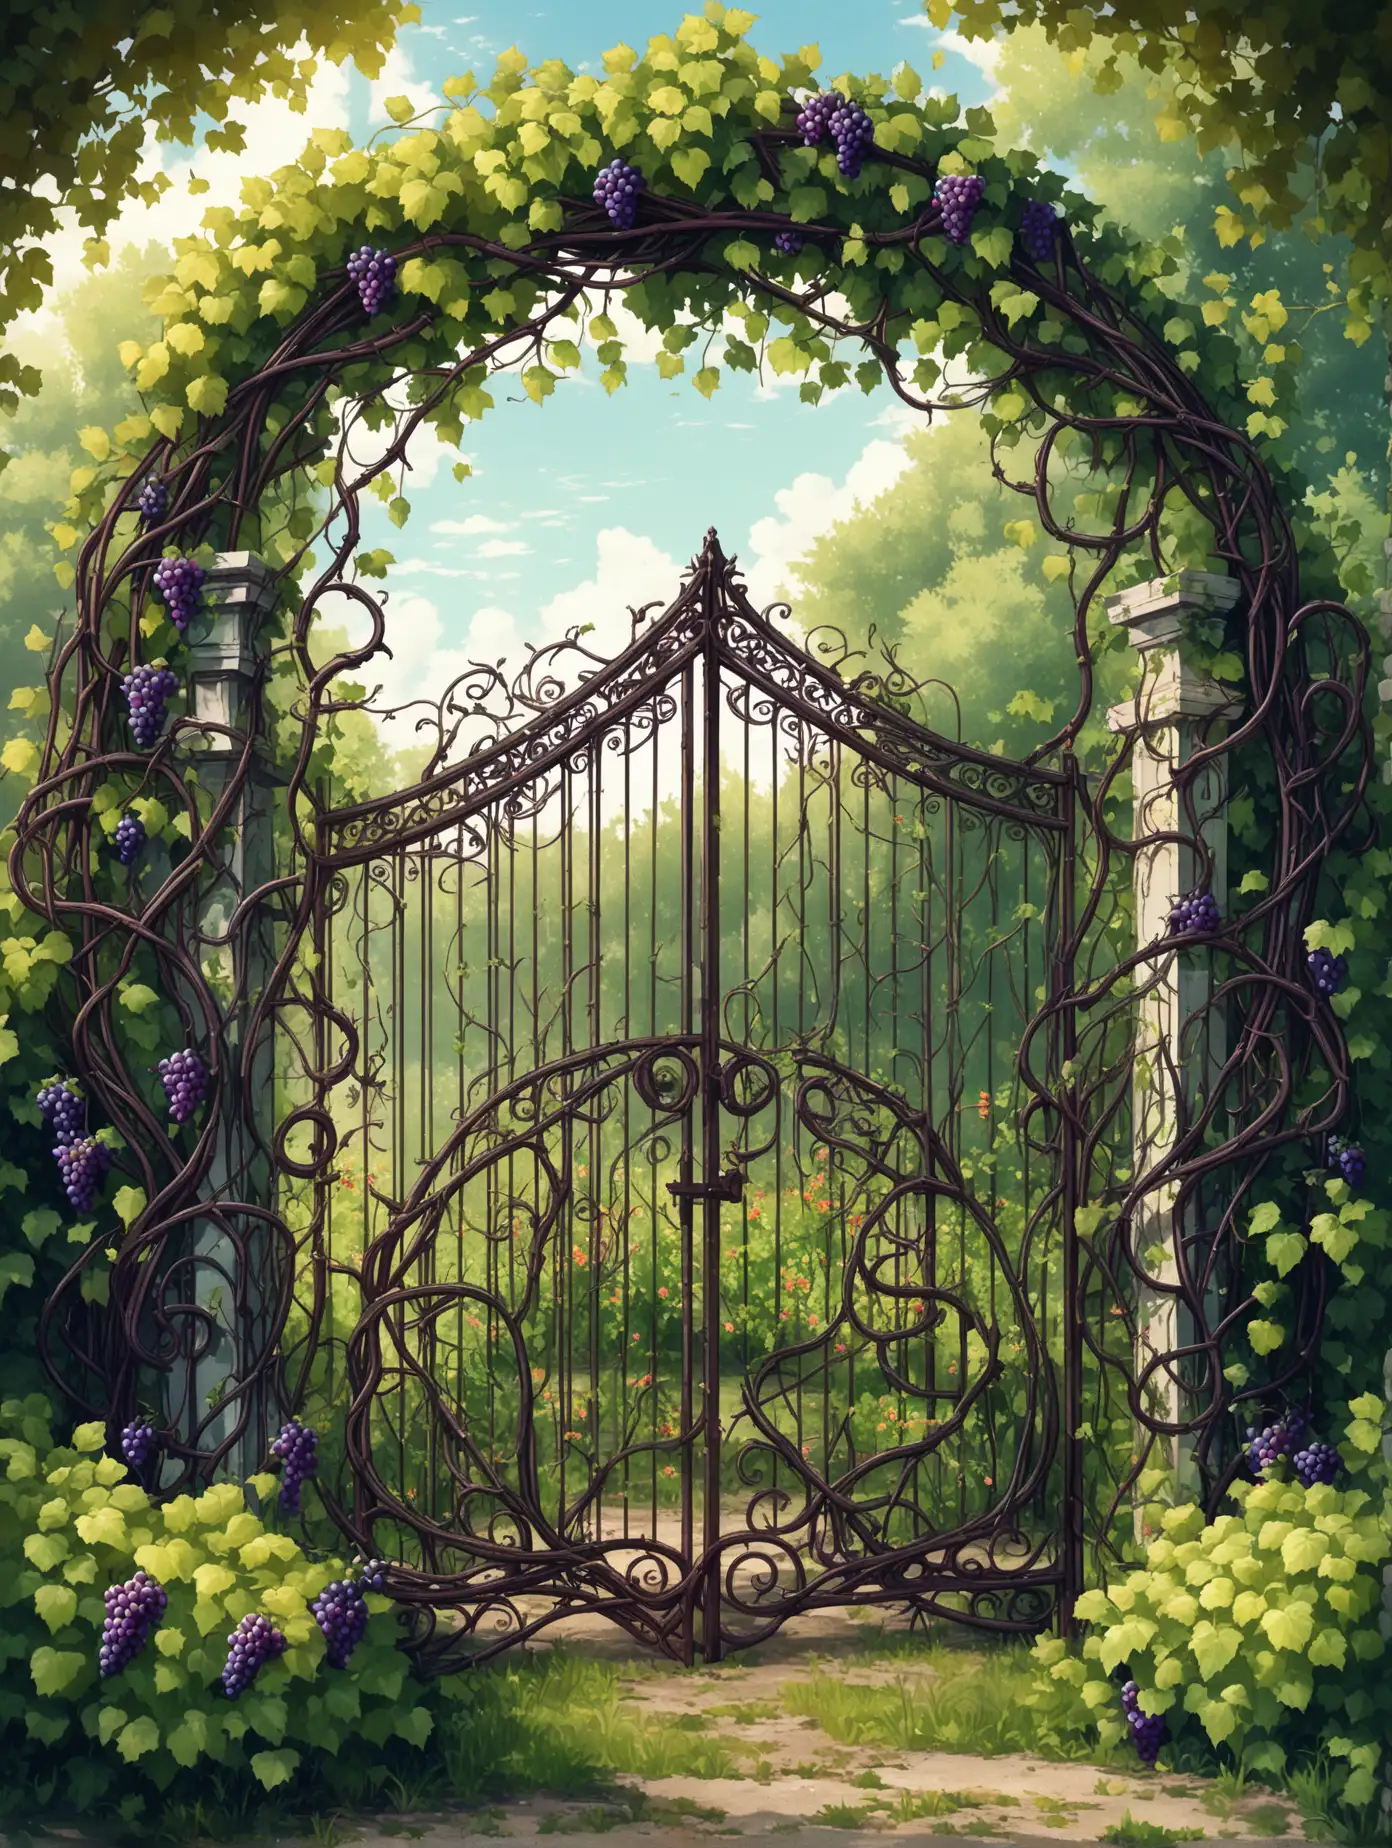 Forged-Decorative-Gate-Amid-Abandoned-Garden-with-Intertwined-Flowers-and-Grapevines